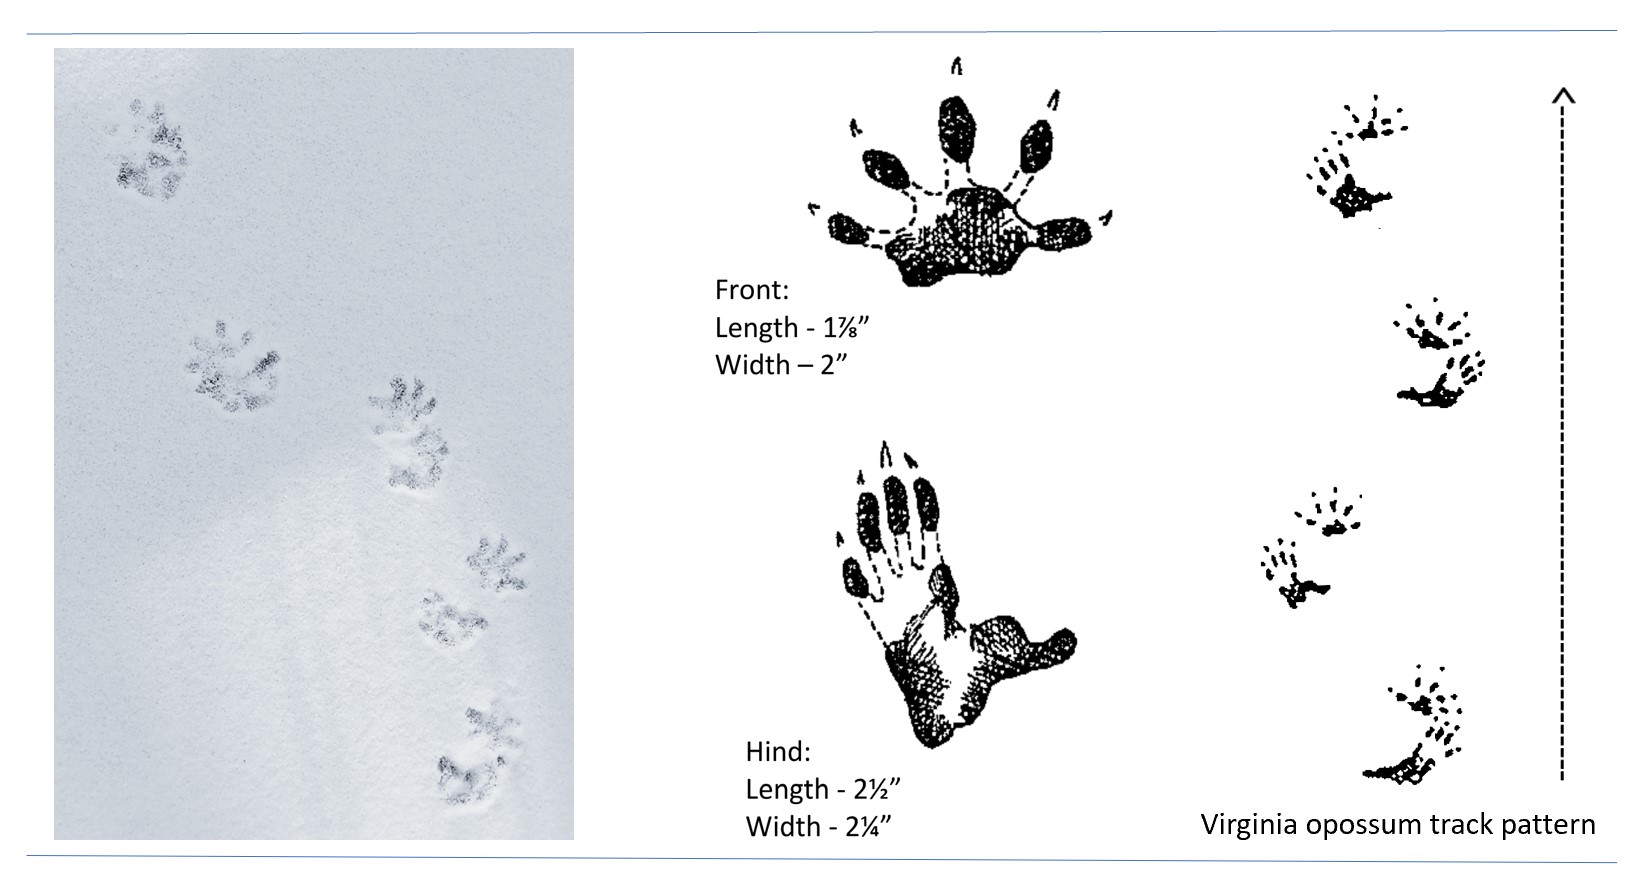 Photo and illustrated tracks of a Virginia opossum.